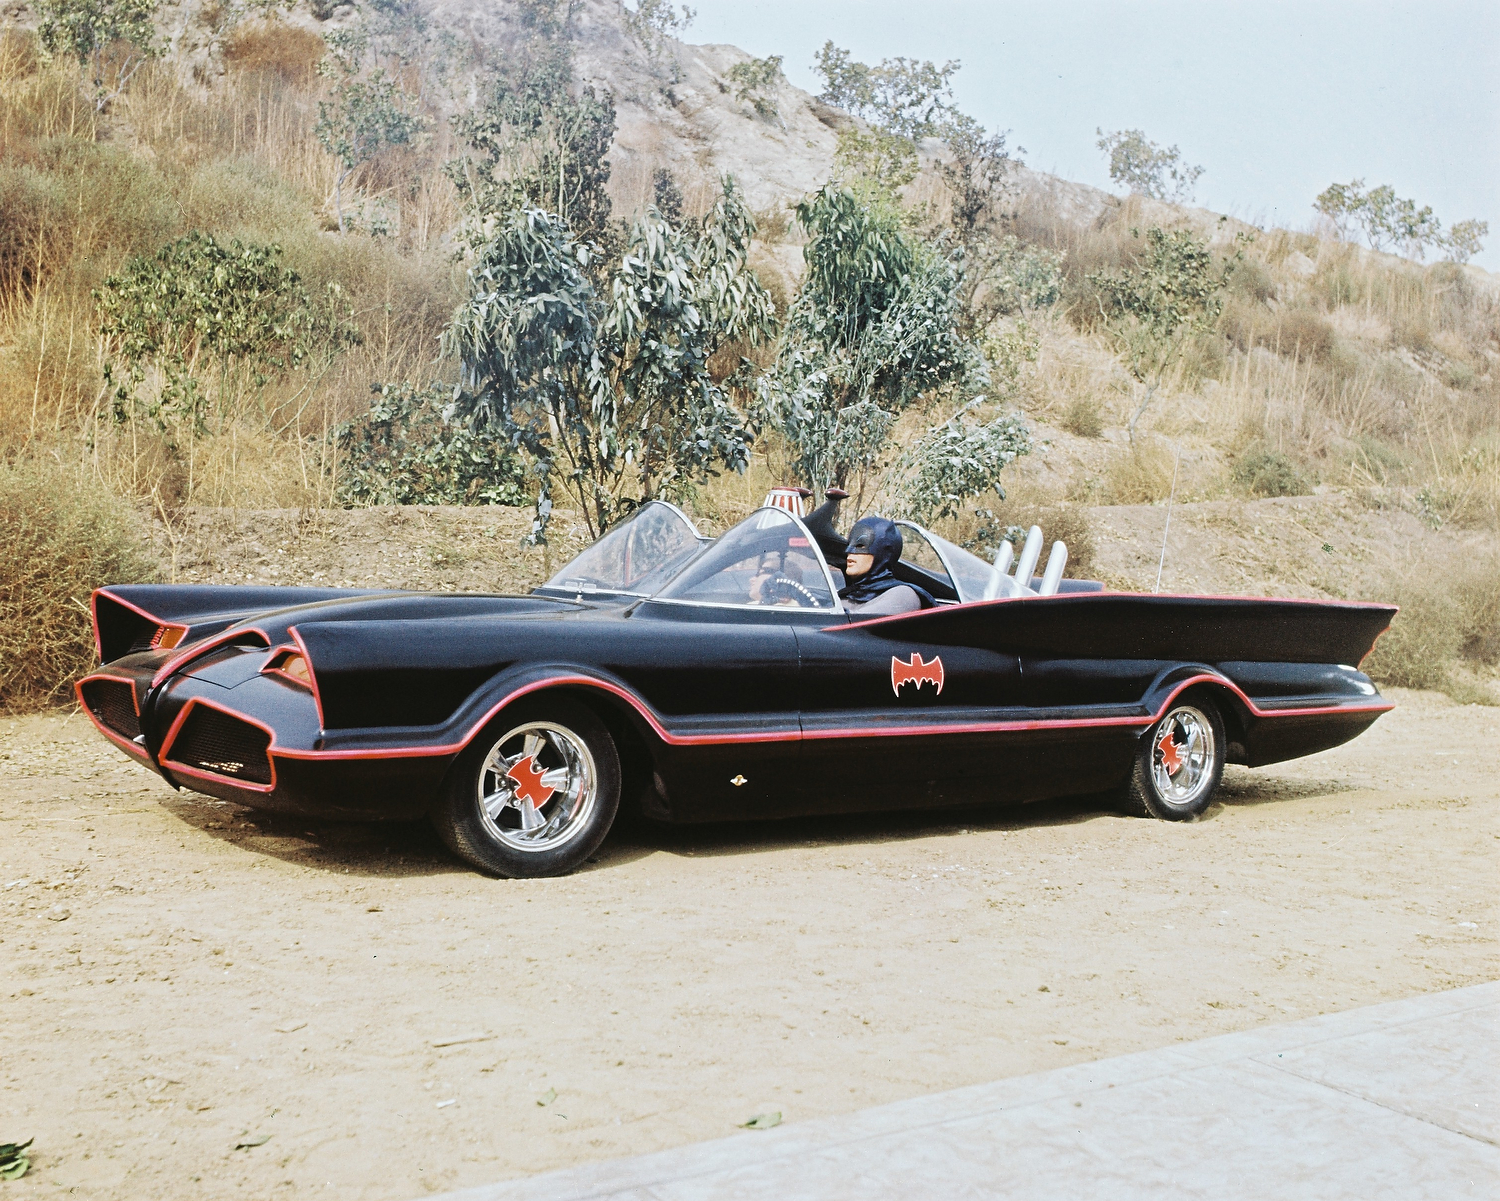 First 'Batmobile' sold at auction for $137K